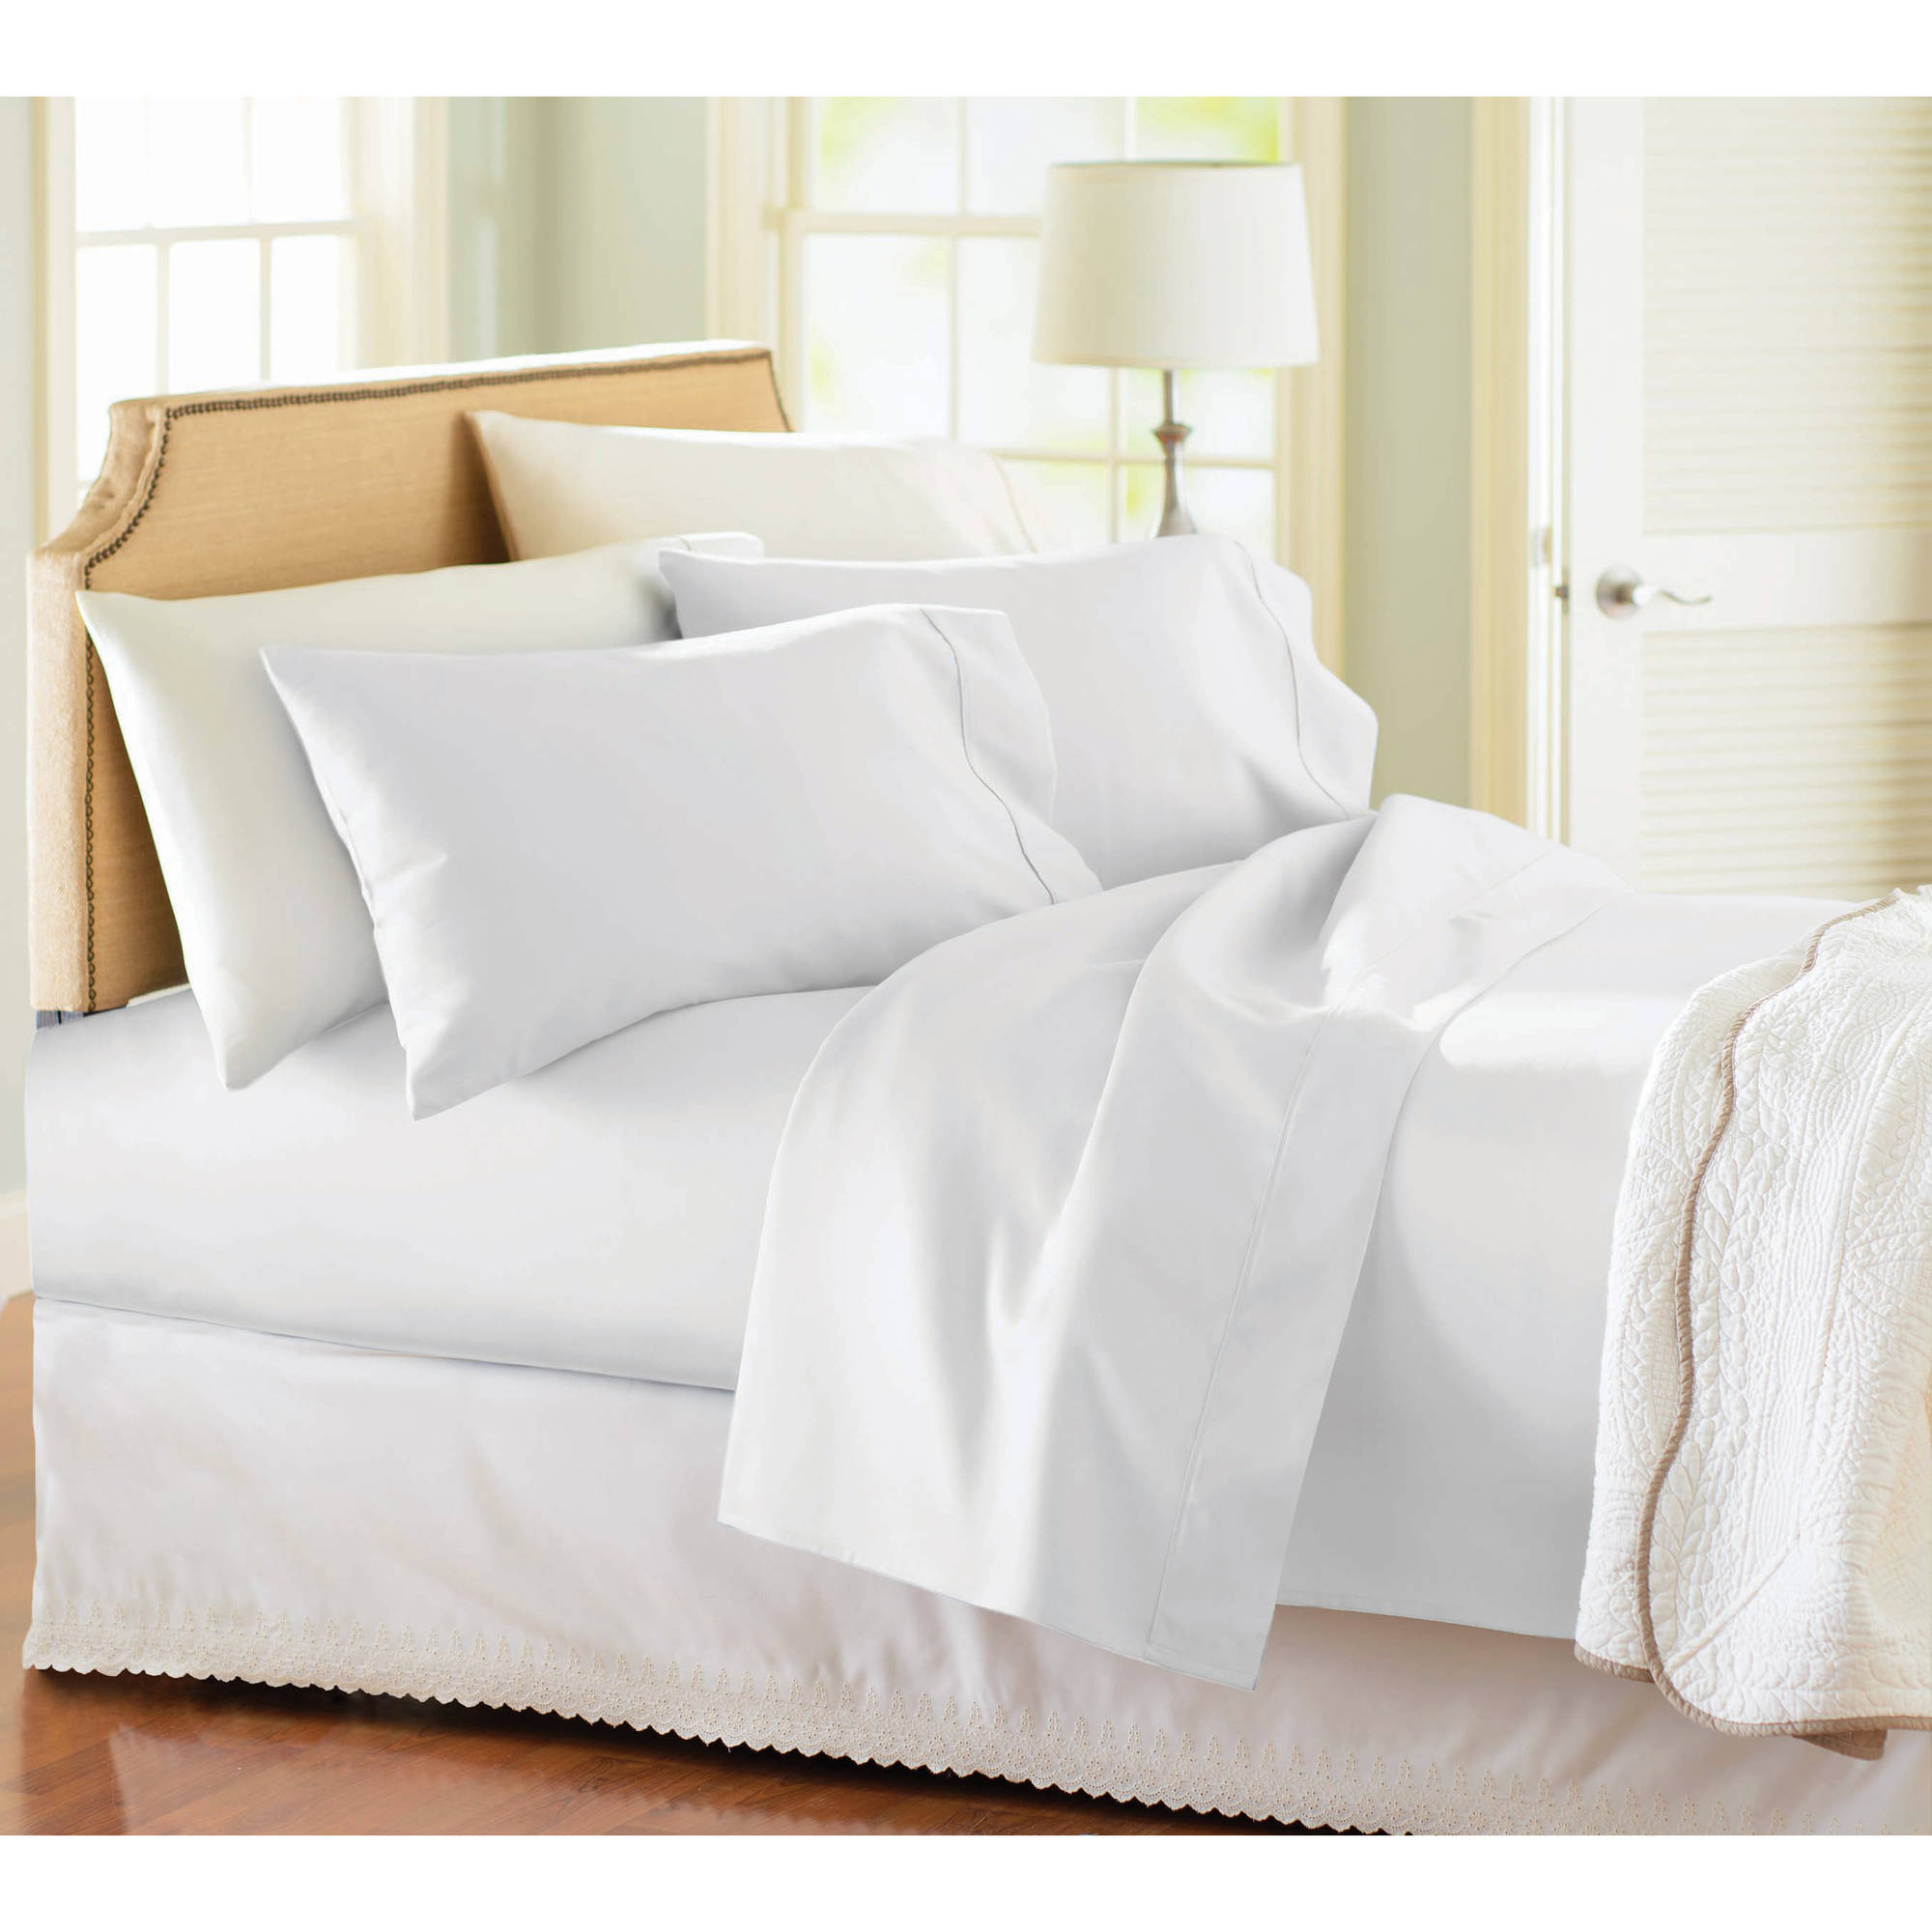 Better Homes & Gardens 300 Thread Count Twin Bedding Sheet Set - image 2 of 2